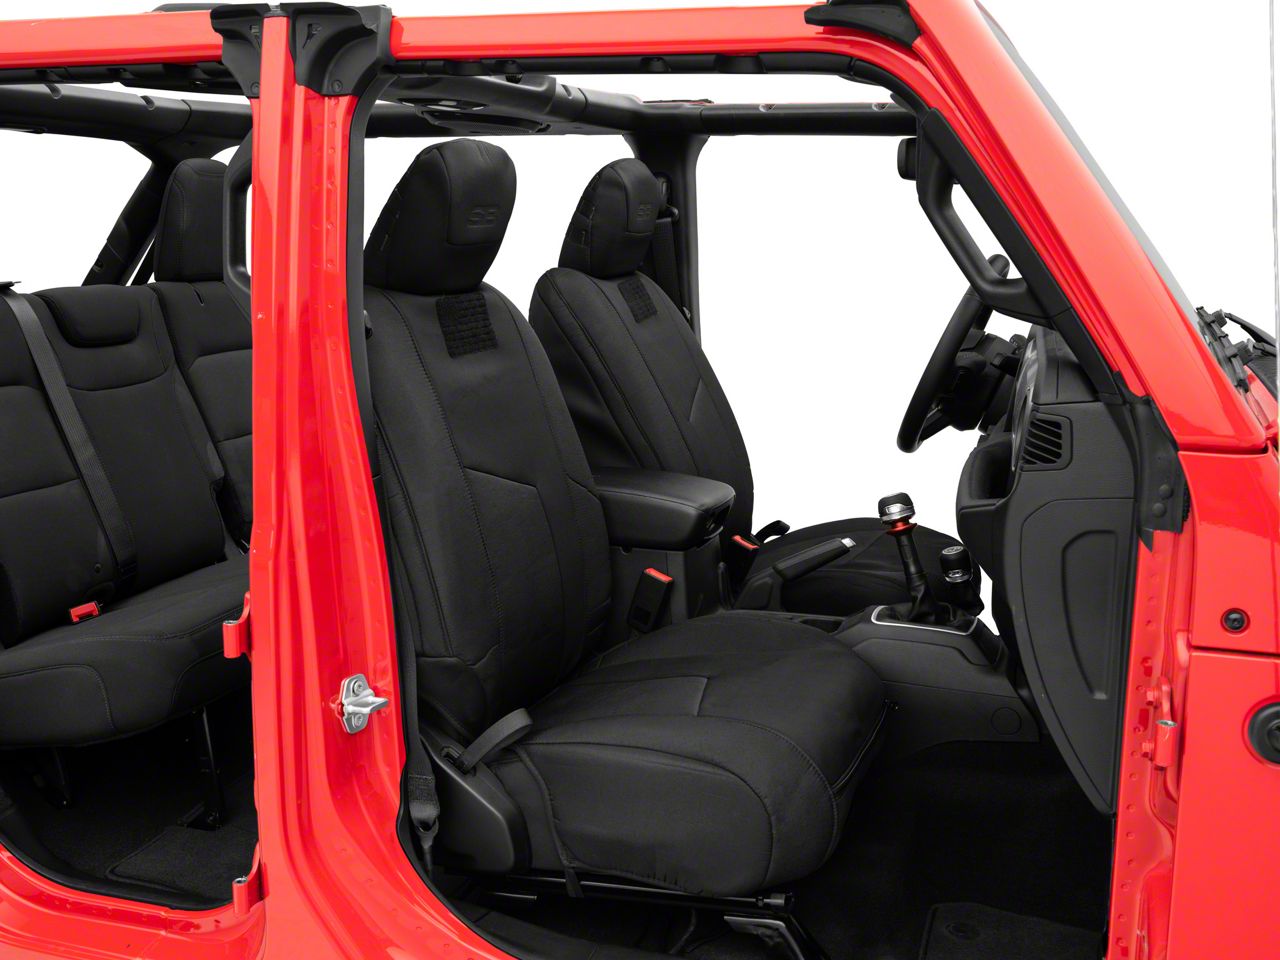 Smittybilt GEAR MOLLE Front Seat Cover & Pouches For 2007-2018 Jeep Wrangler JK